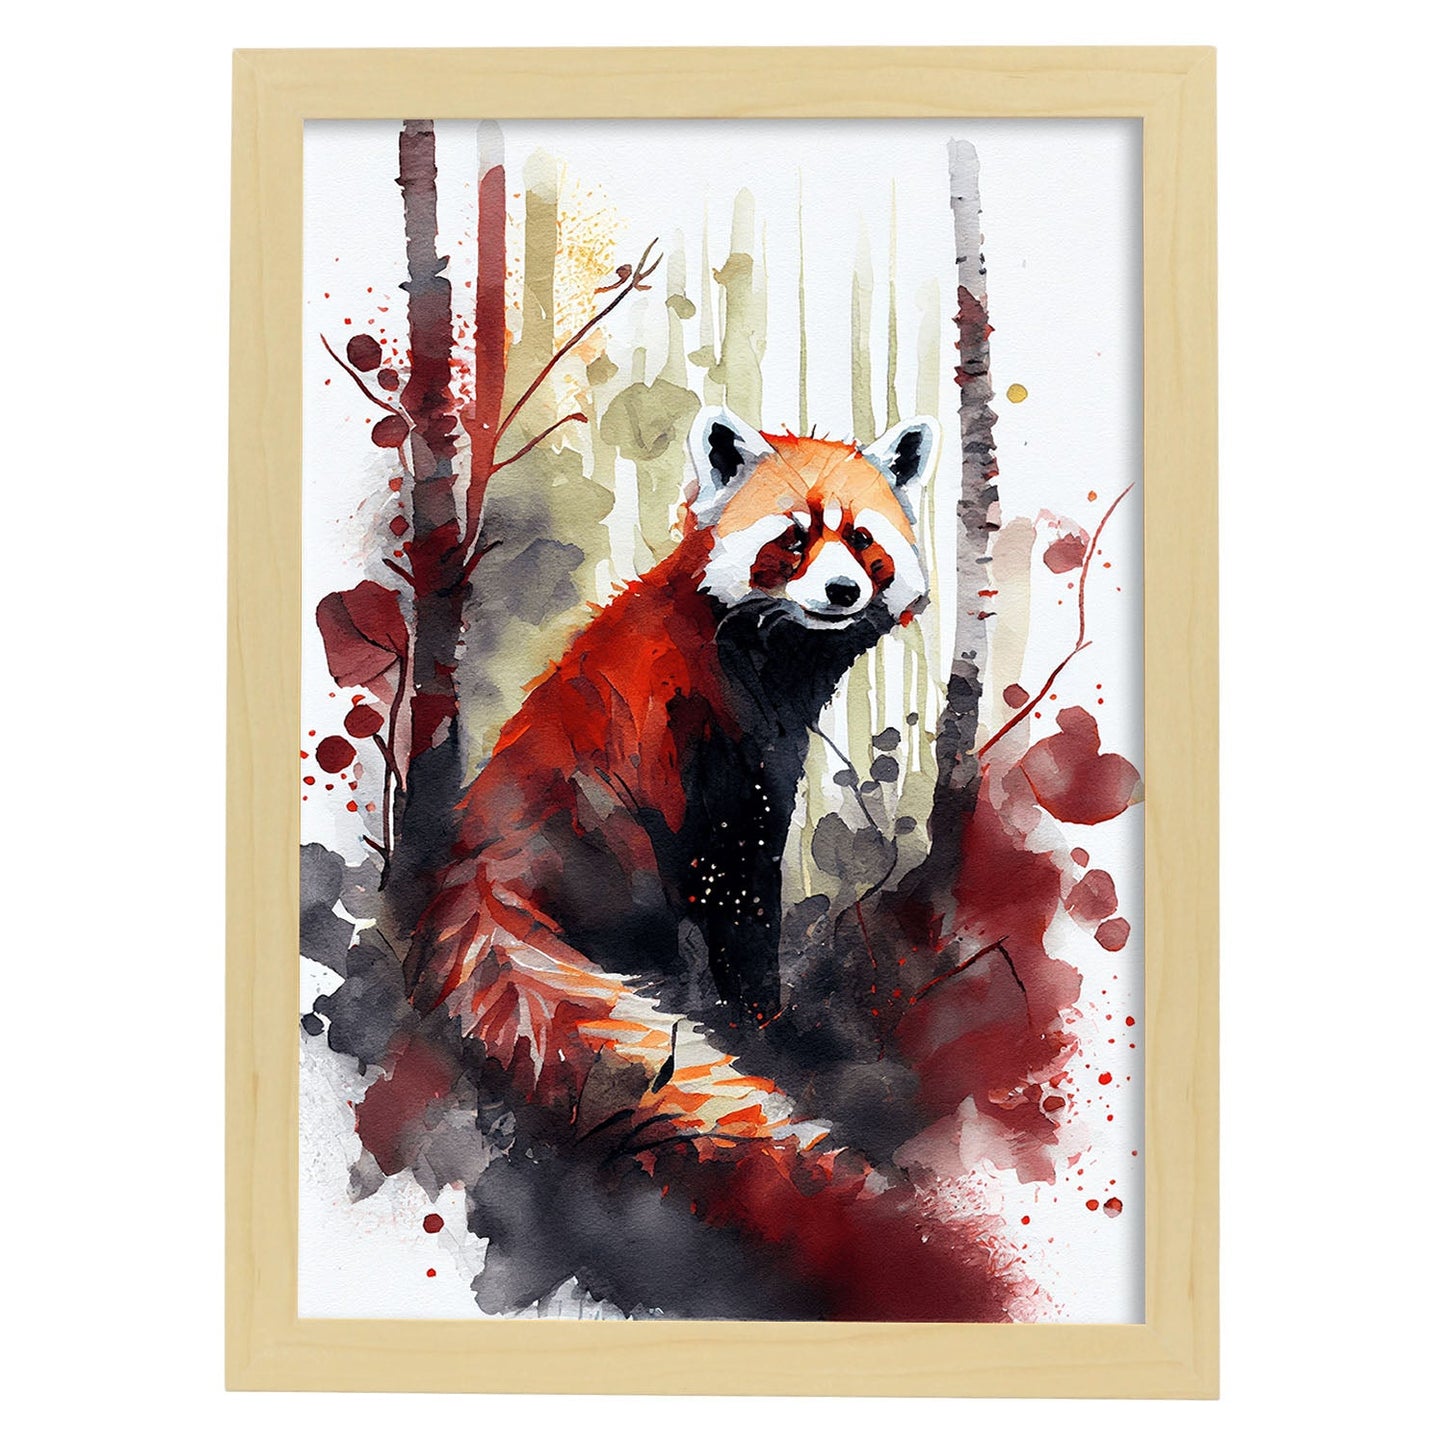 Nacnic Watercolor of Red Panda in the forest. Aesthetic Wall Art Prints for Bedroom or Living Room Design.